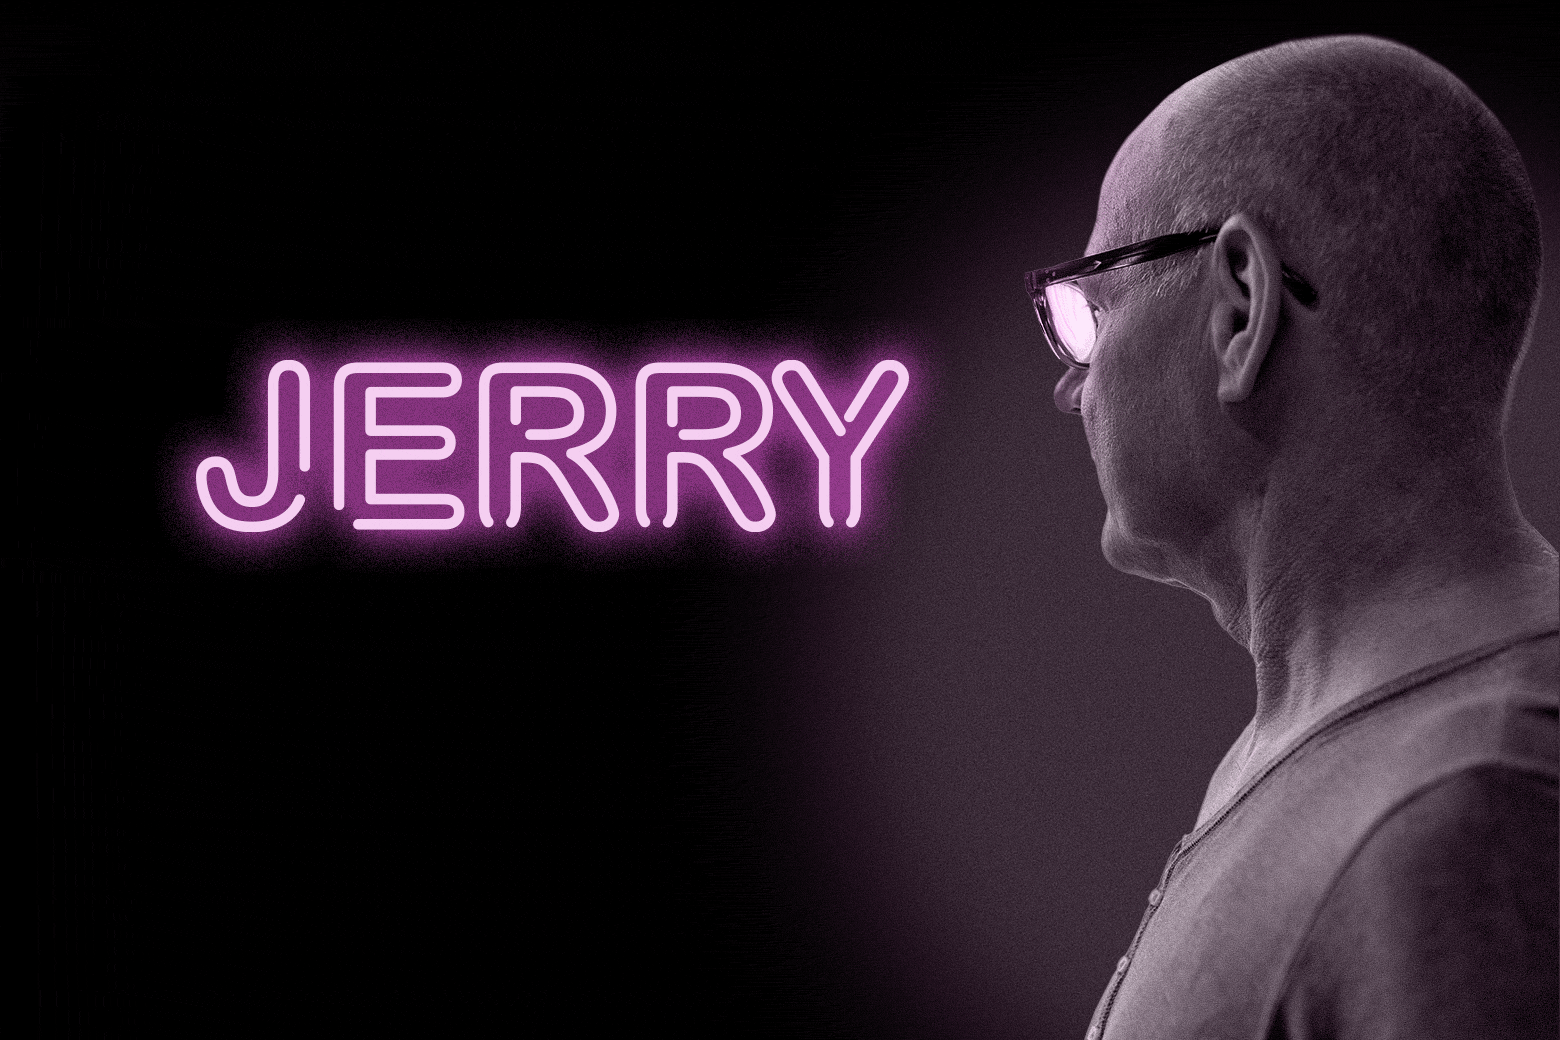 Man looking at a name "Jerry" glowing in neon.